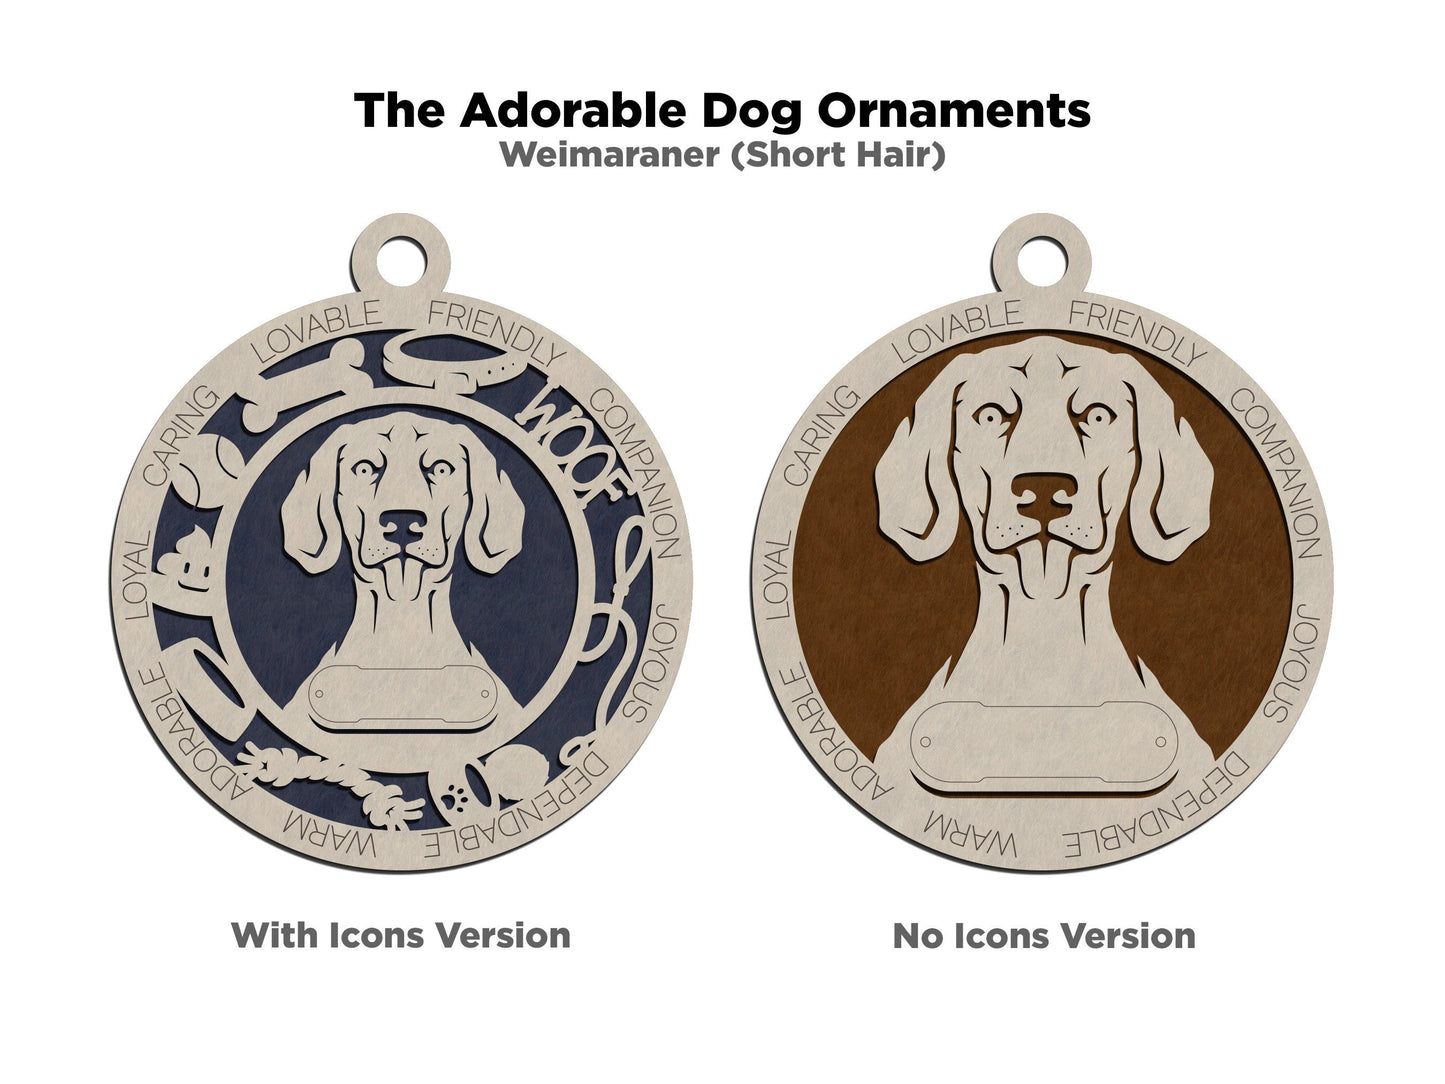 Weimaraner - Adorable Dog Ornaments - 4 Ornaments included - SVG, PDF, AI File Download - Sized for Glowforge